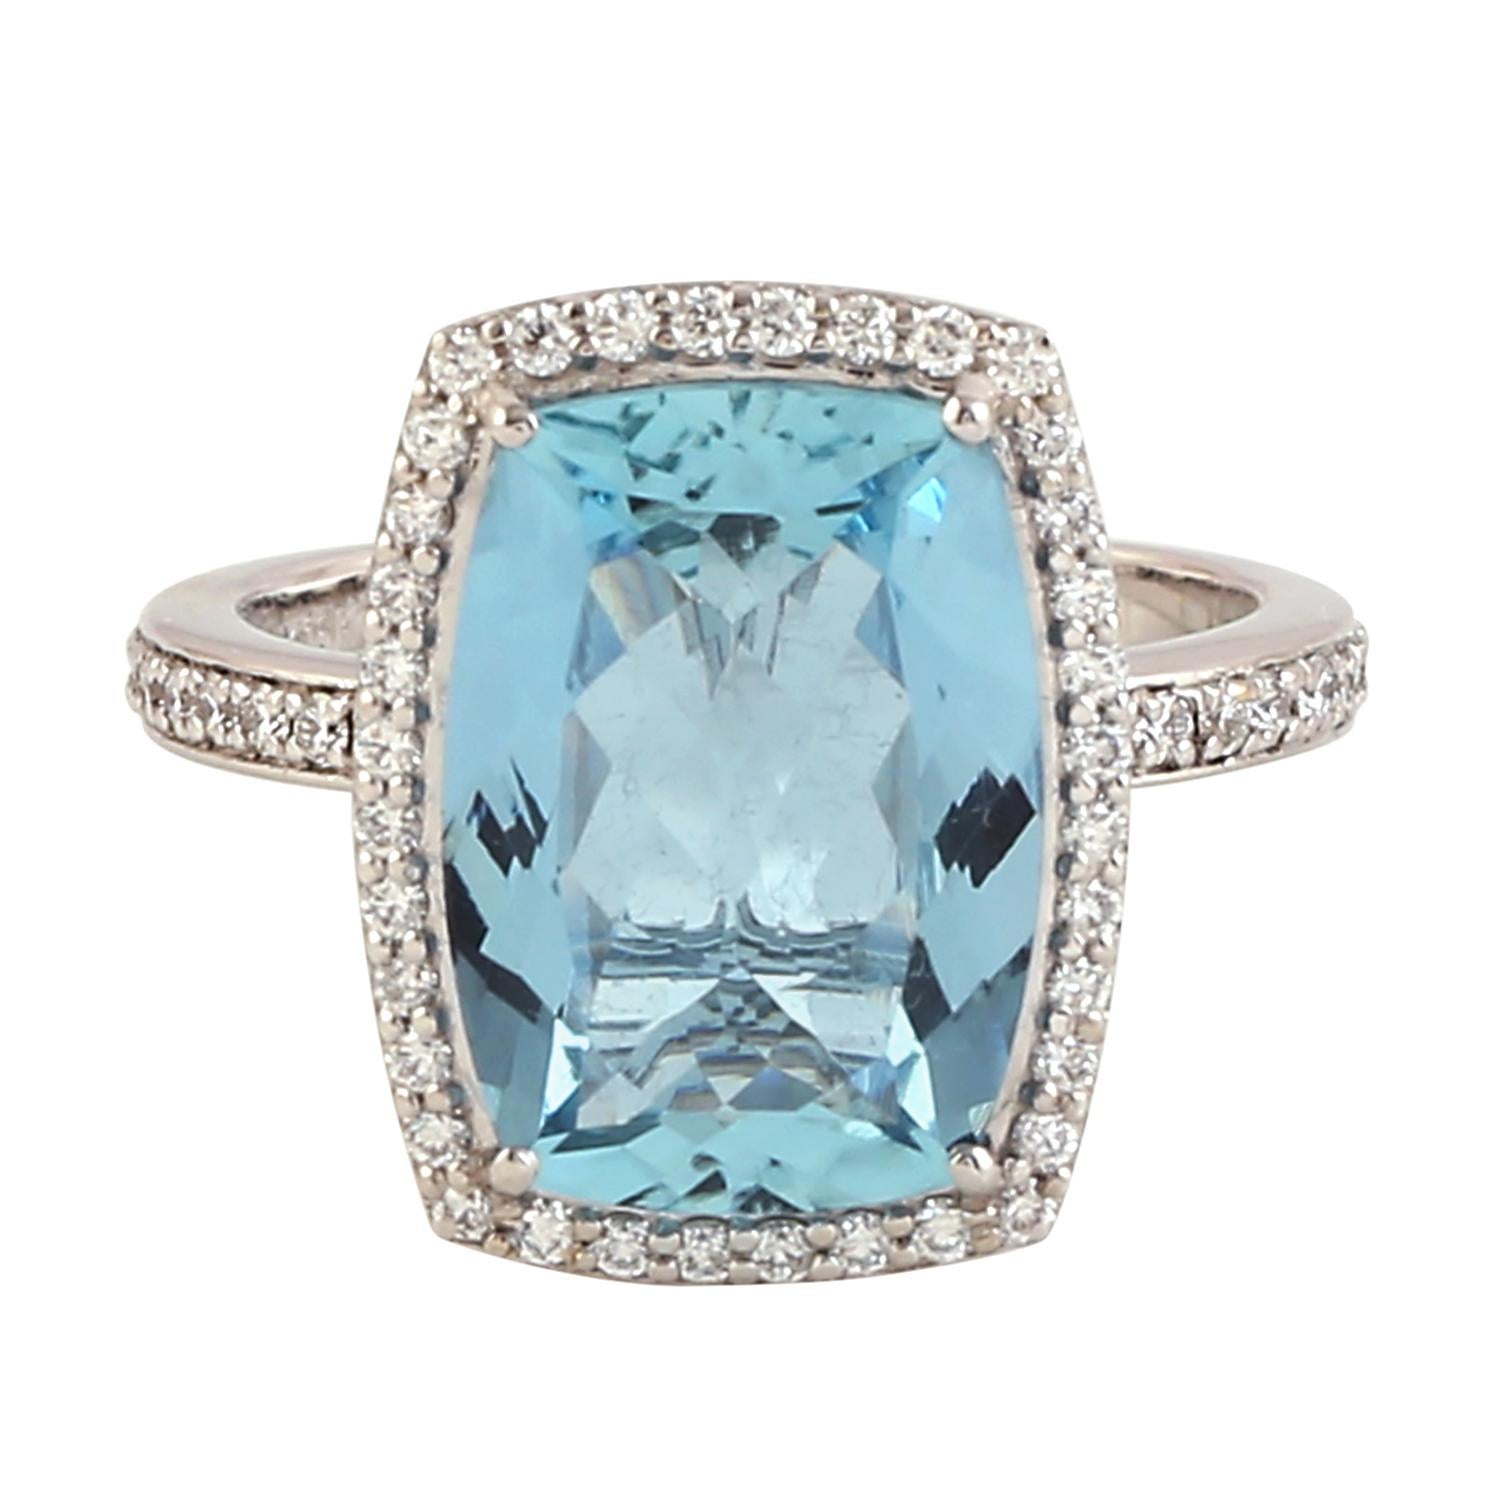 Modern Classic Cushion Shape Aquamarine Cocktail Ring with Diamonds in 18k Gold